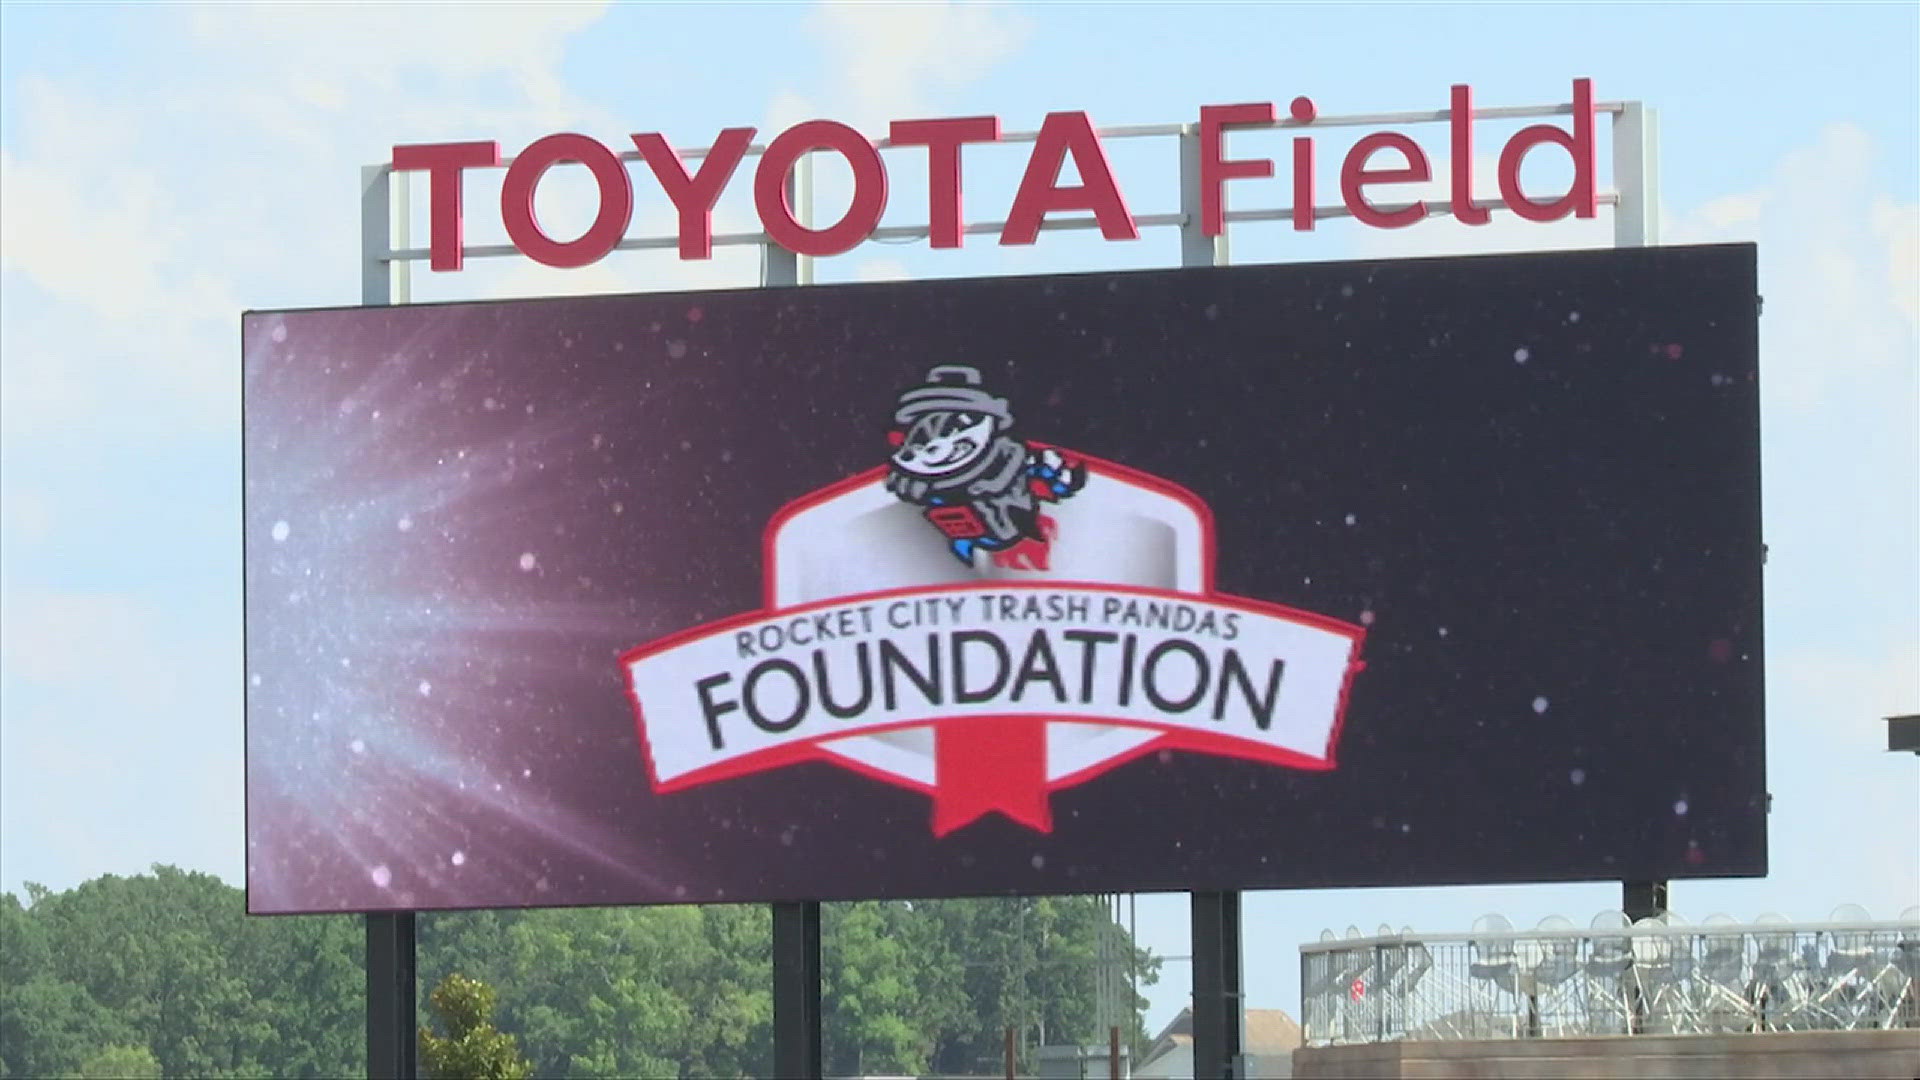 After the weeklong series with the M-Braves got moved to Toyota Field due to bad field conditions in Pearl, MS, the Pandas opted to raise money instead of revenue.